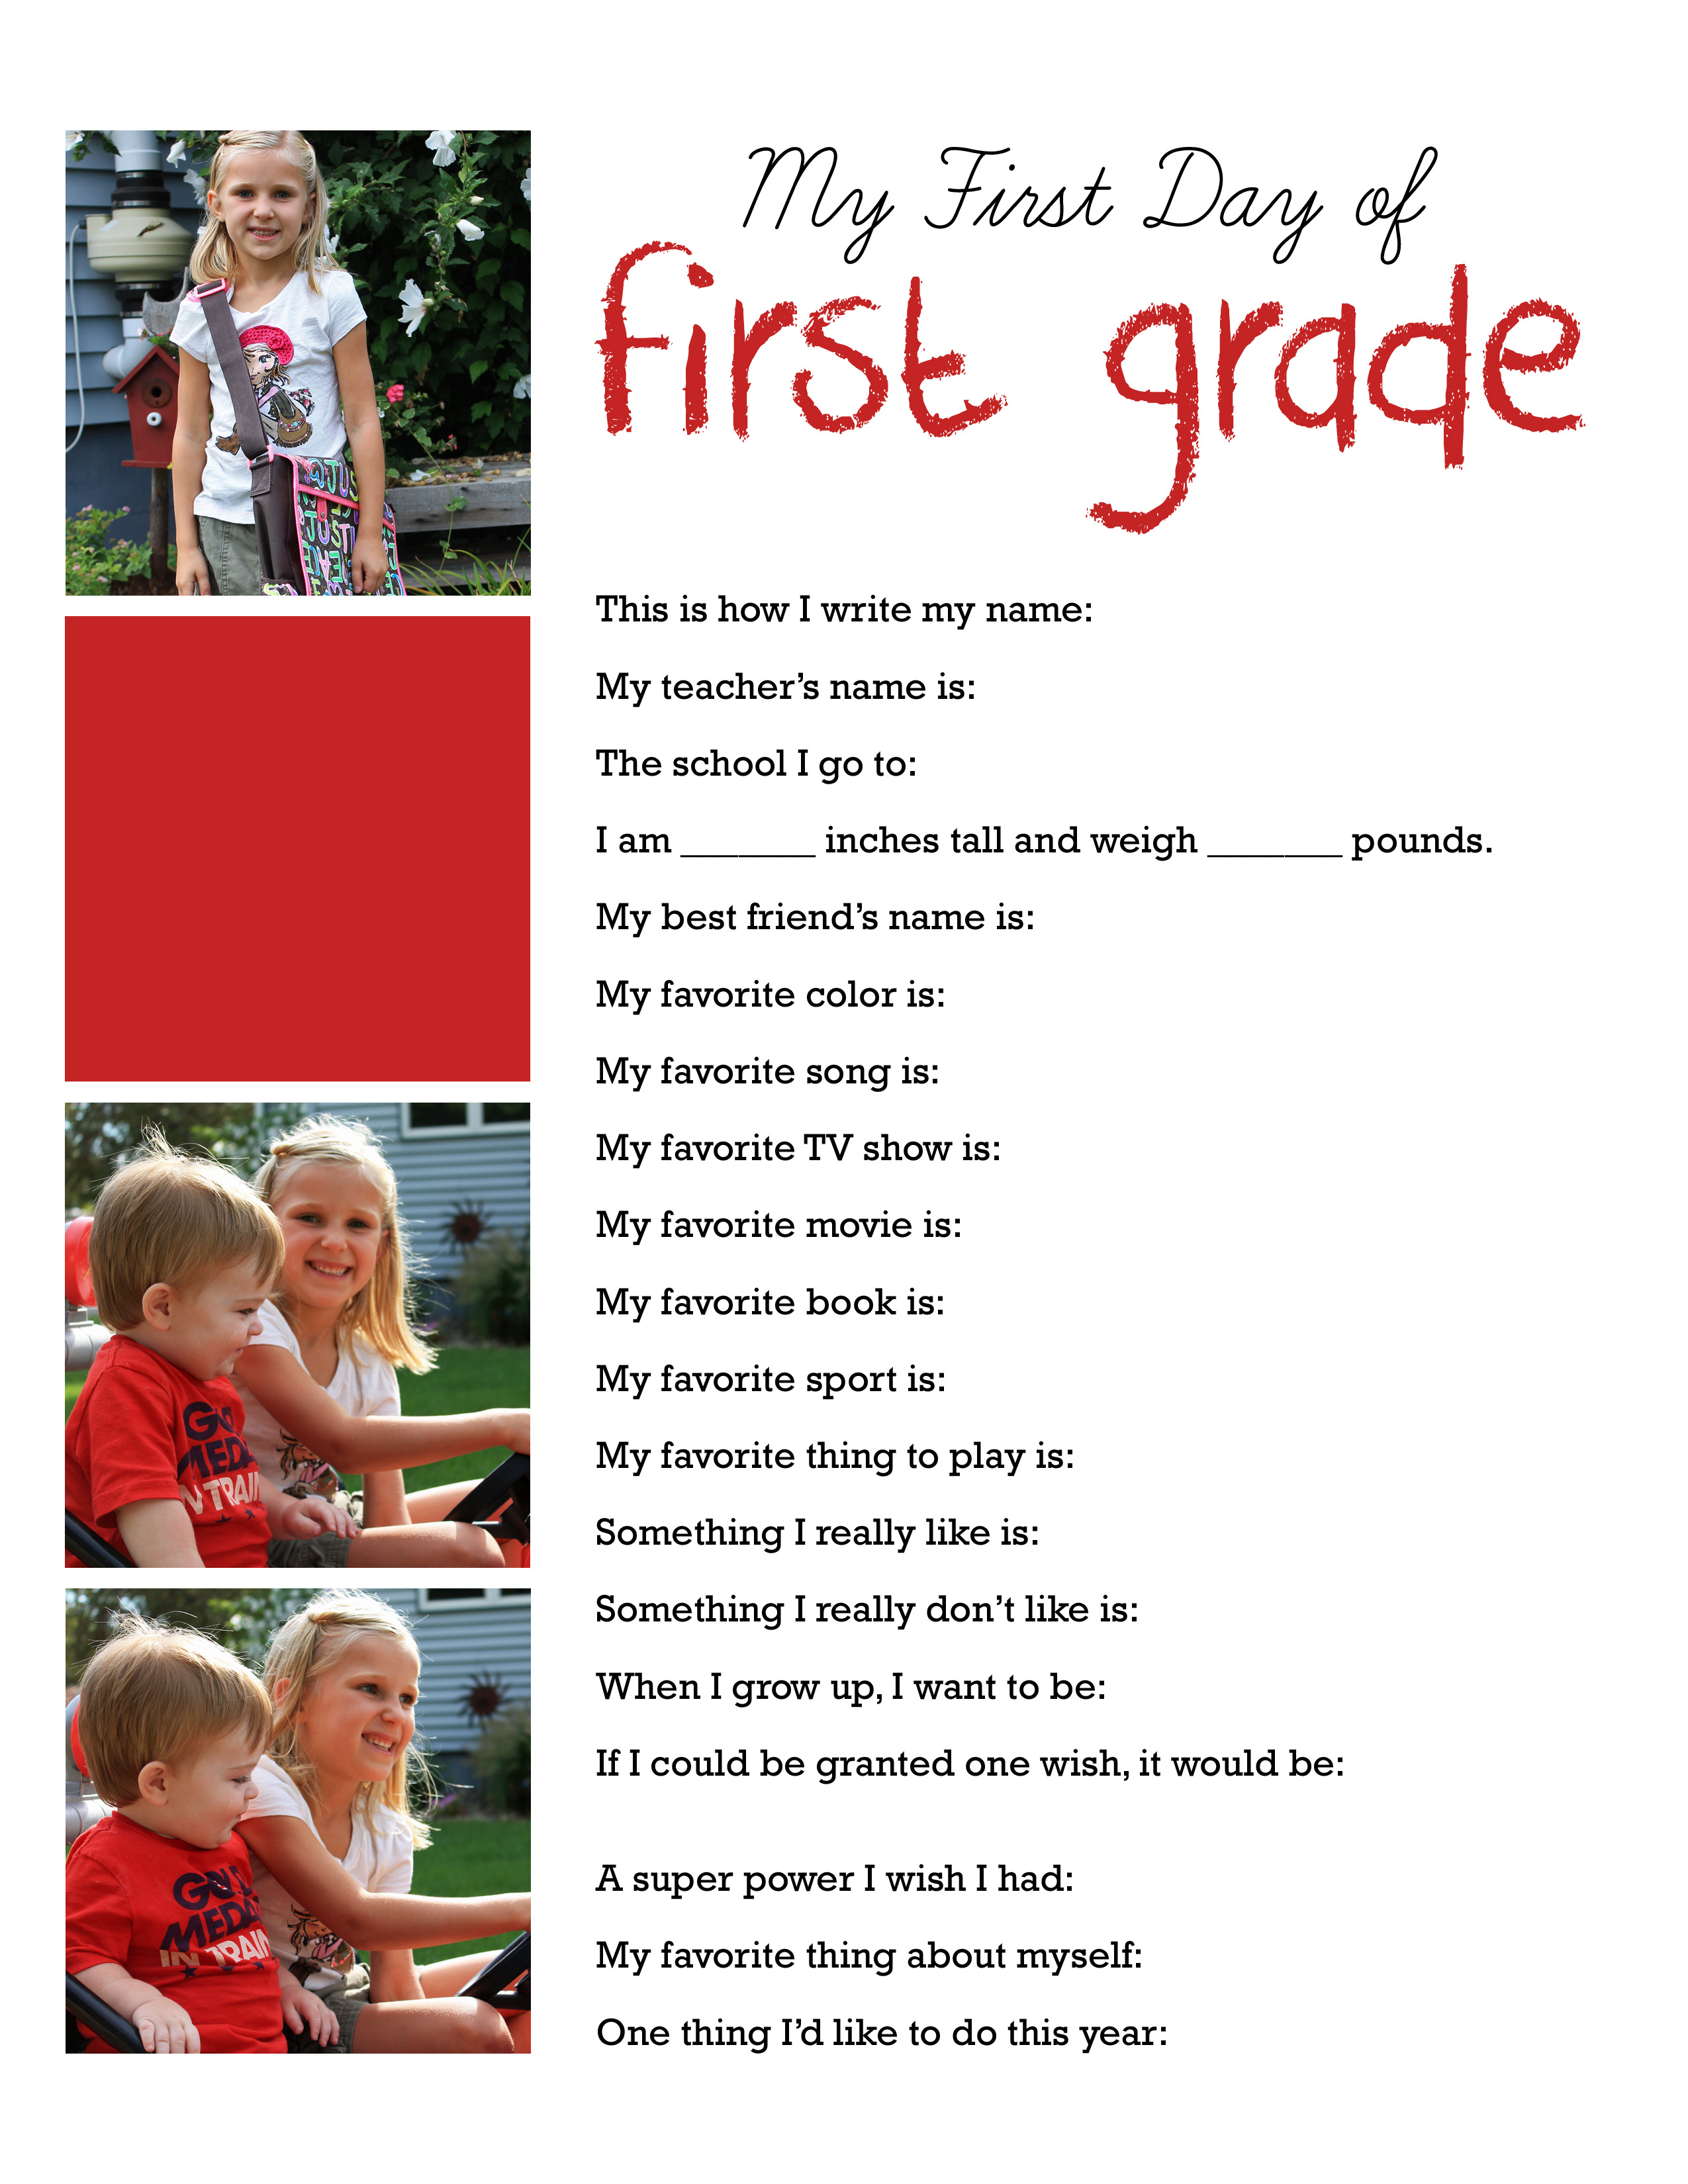 Printable Back to School Interviews (Templates) Who Arted?